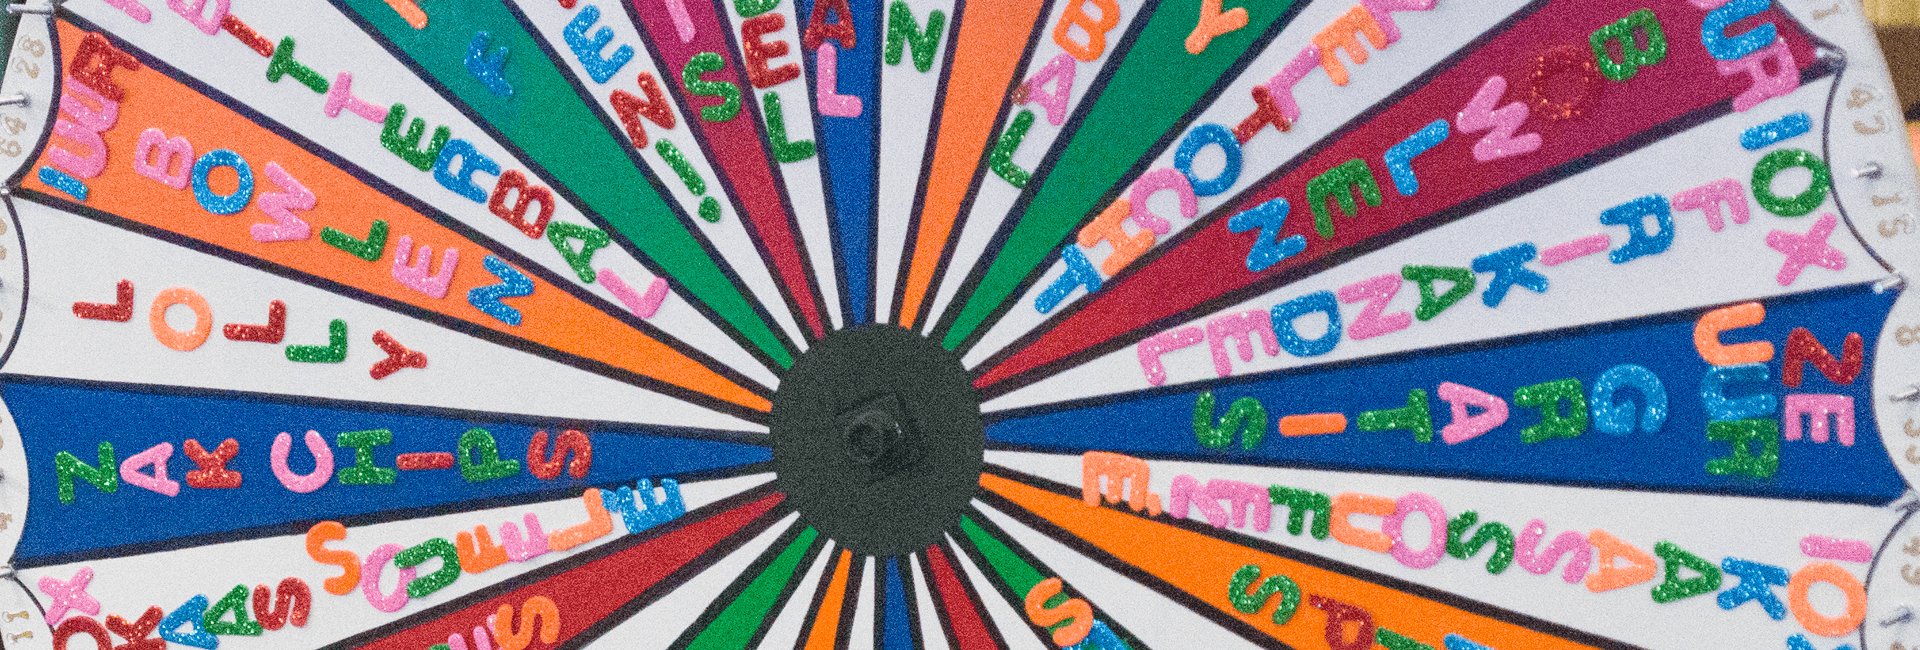 Spin the Karre-wheel for great prizes